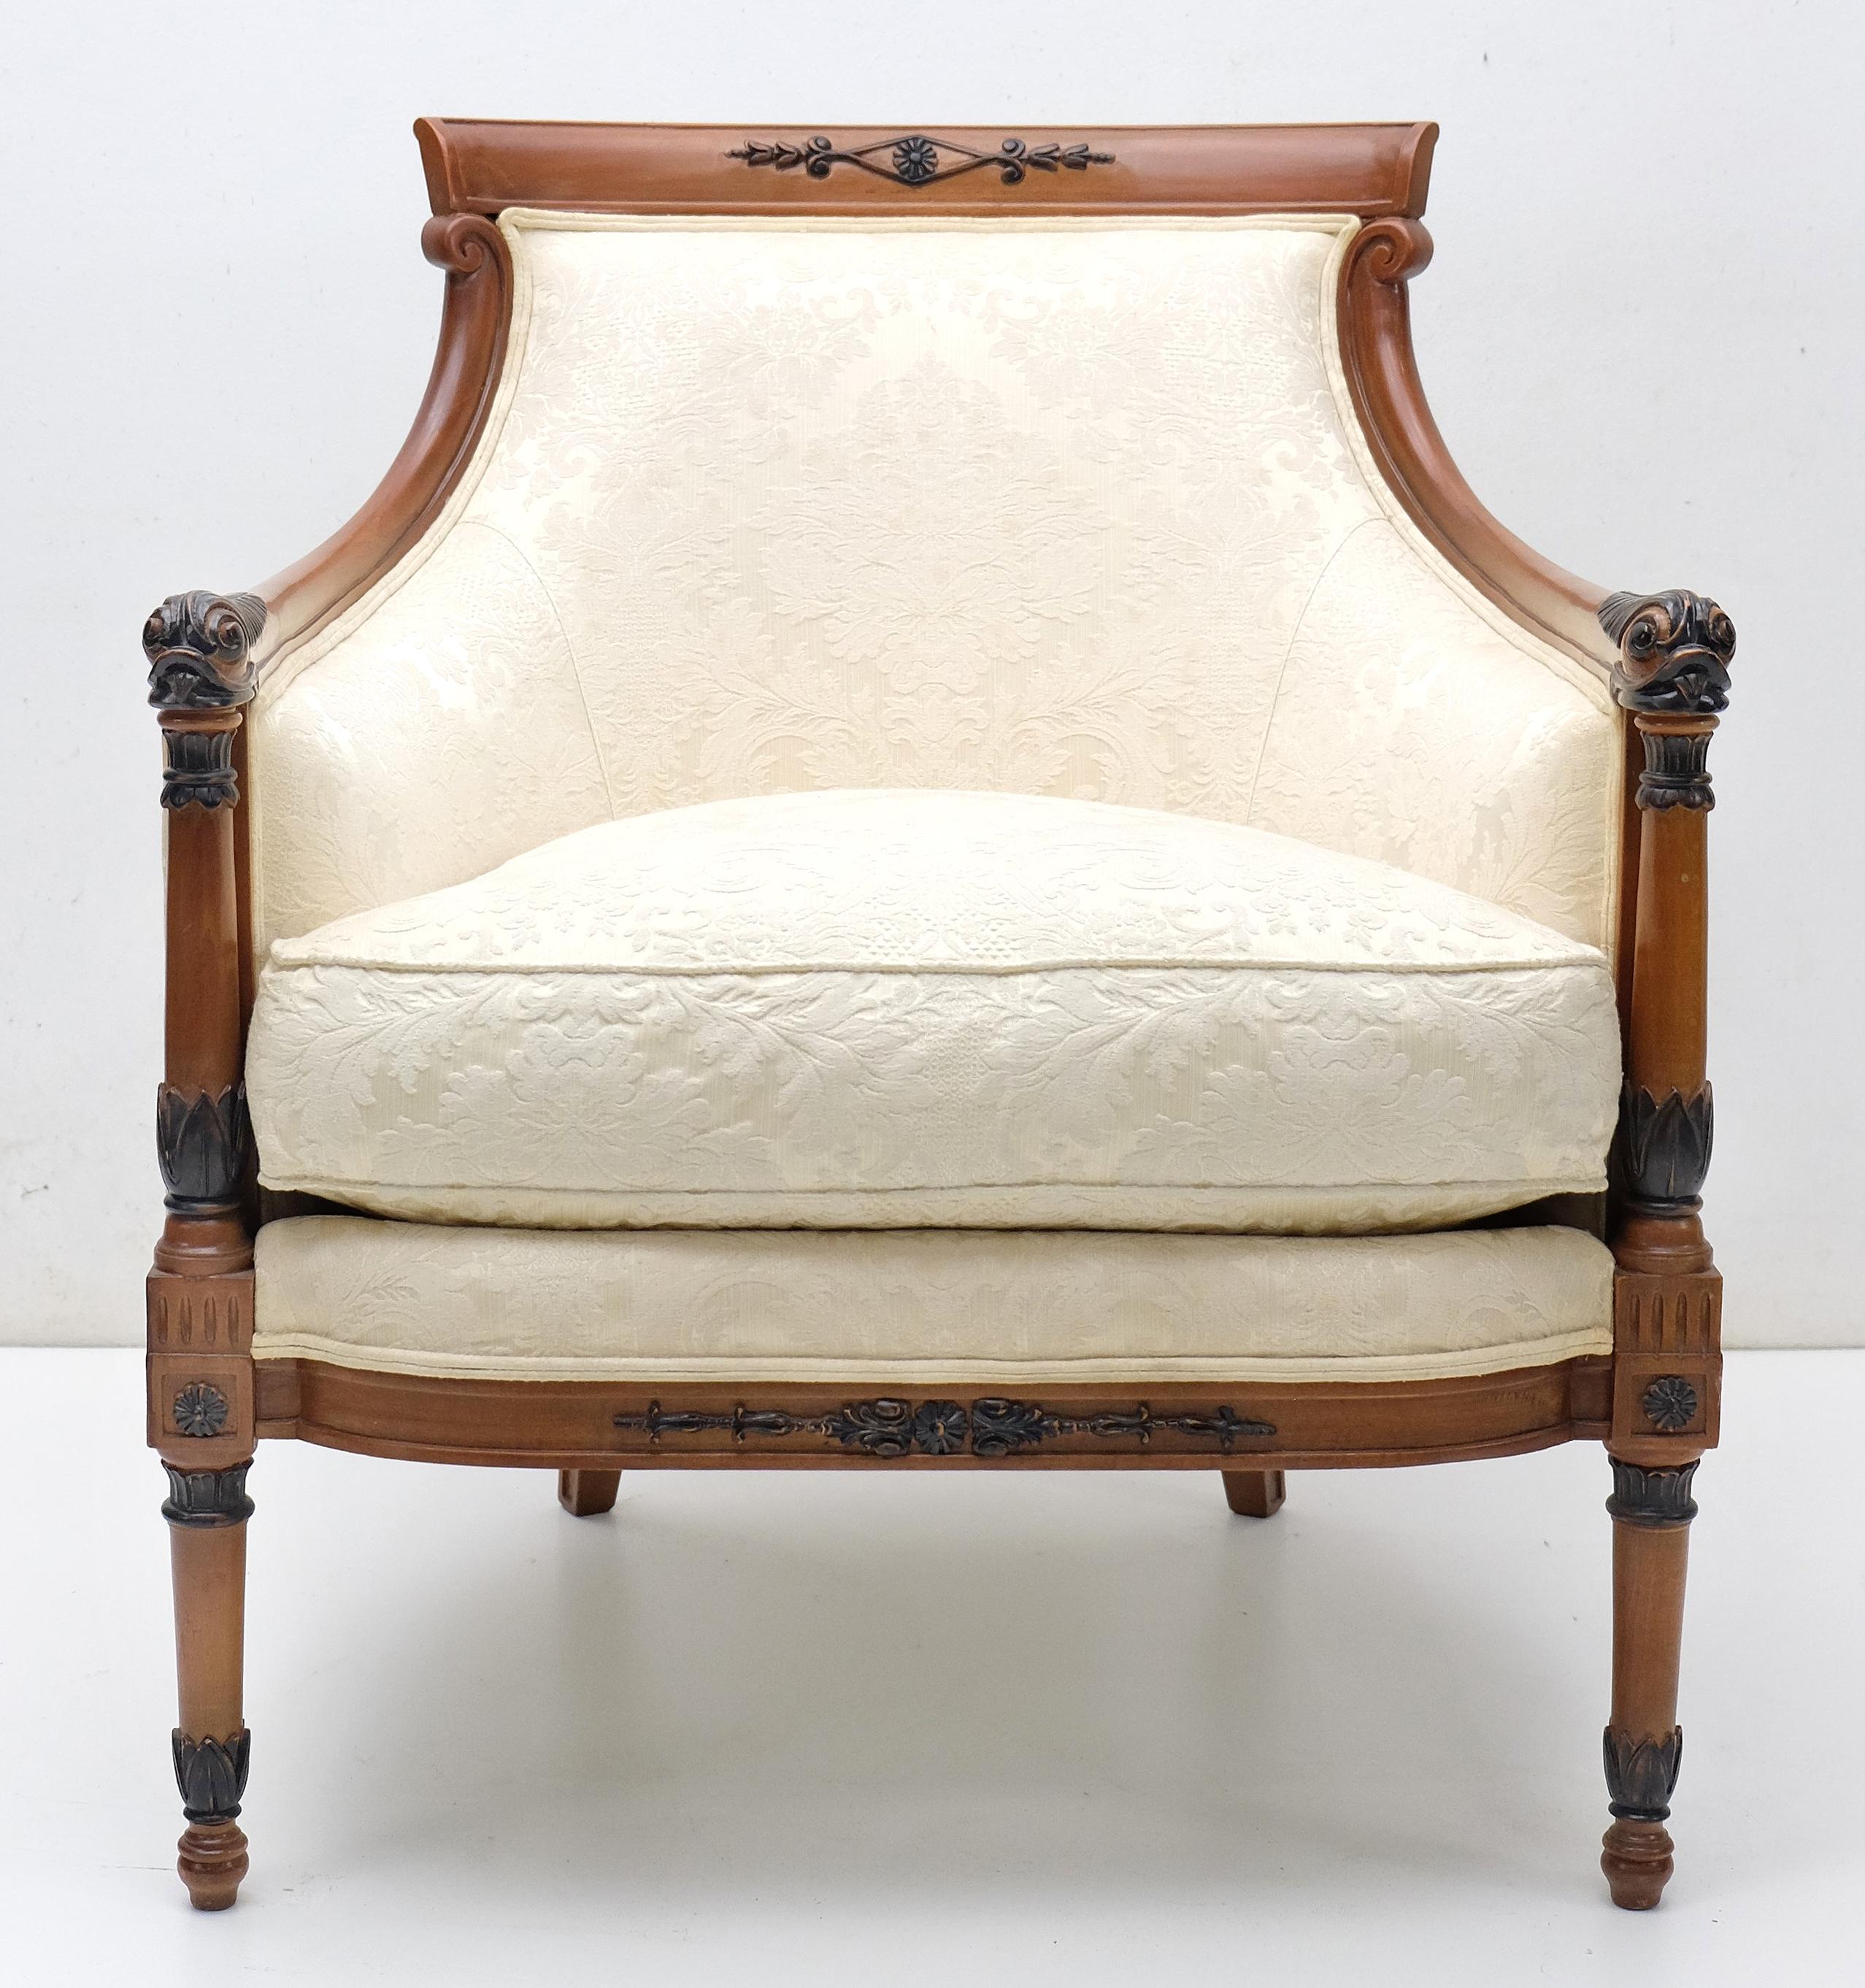 Angelo Cappellini Bergere Armchair

Offered for sale is an upholstered and classical styled bergere armchair from Angelo Cappellini.
The chair is supported by a finely carved wood frame on thin carved legs with stiff armrests. Made of solid wood and